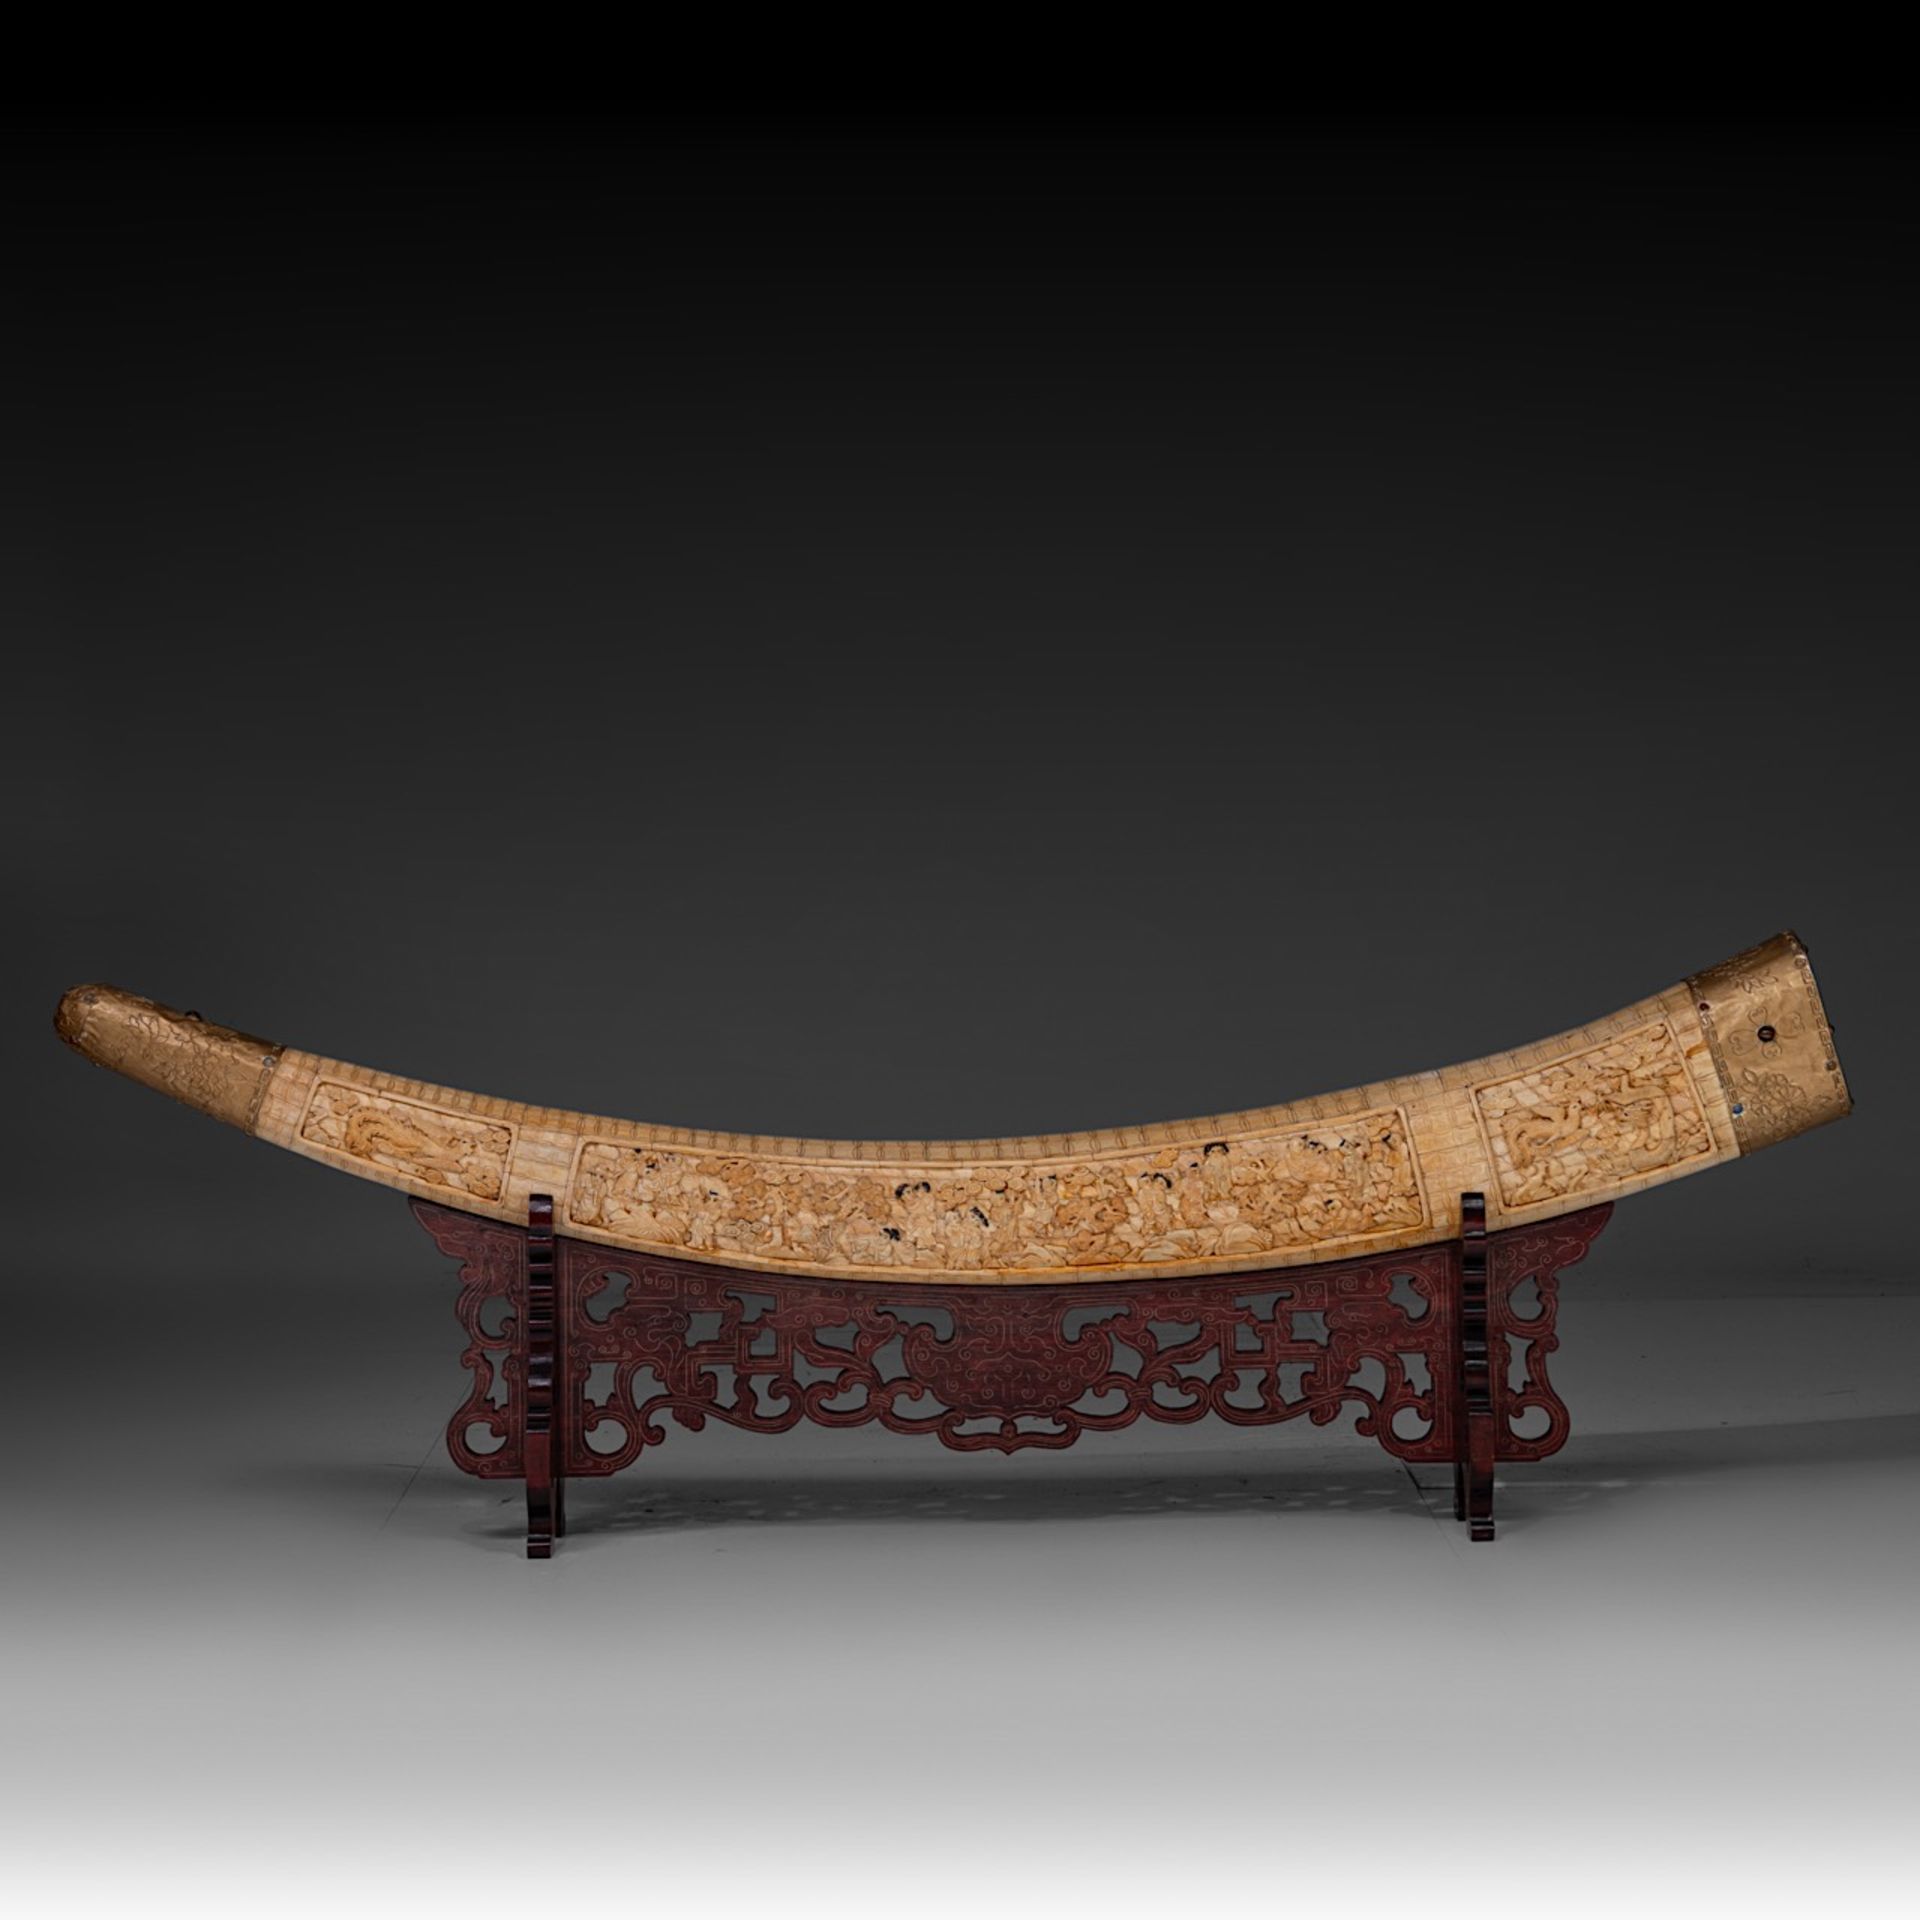 Tusk made from sculpted bone slats, Qing/Republic period, inner arch 165 cm - outer arch 175 cm